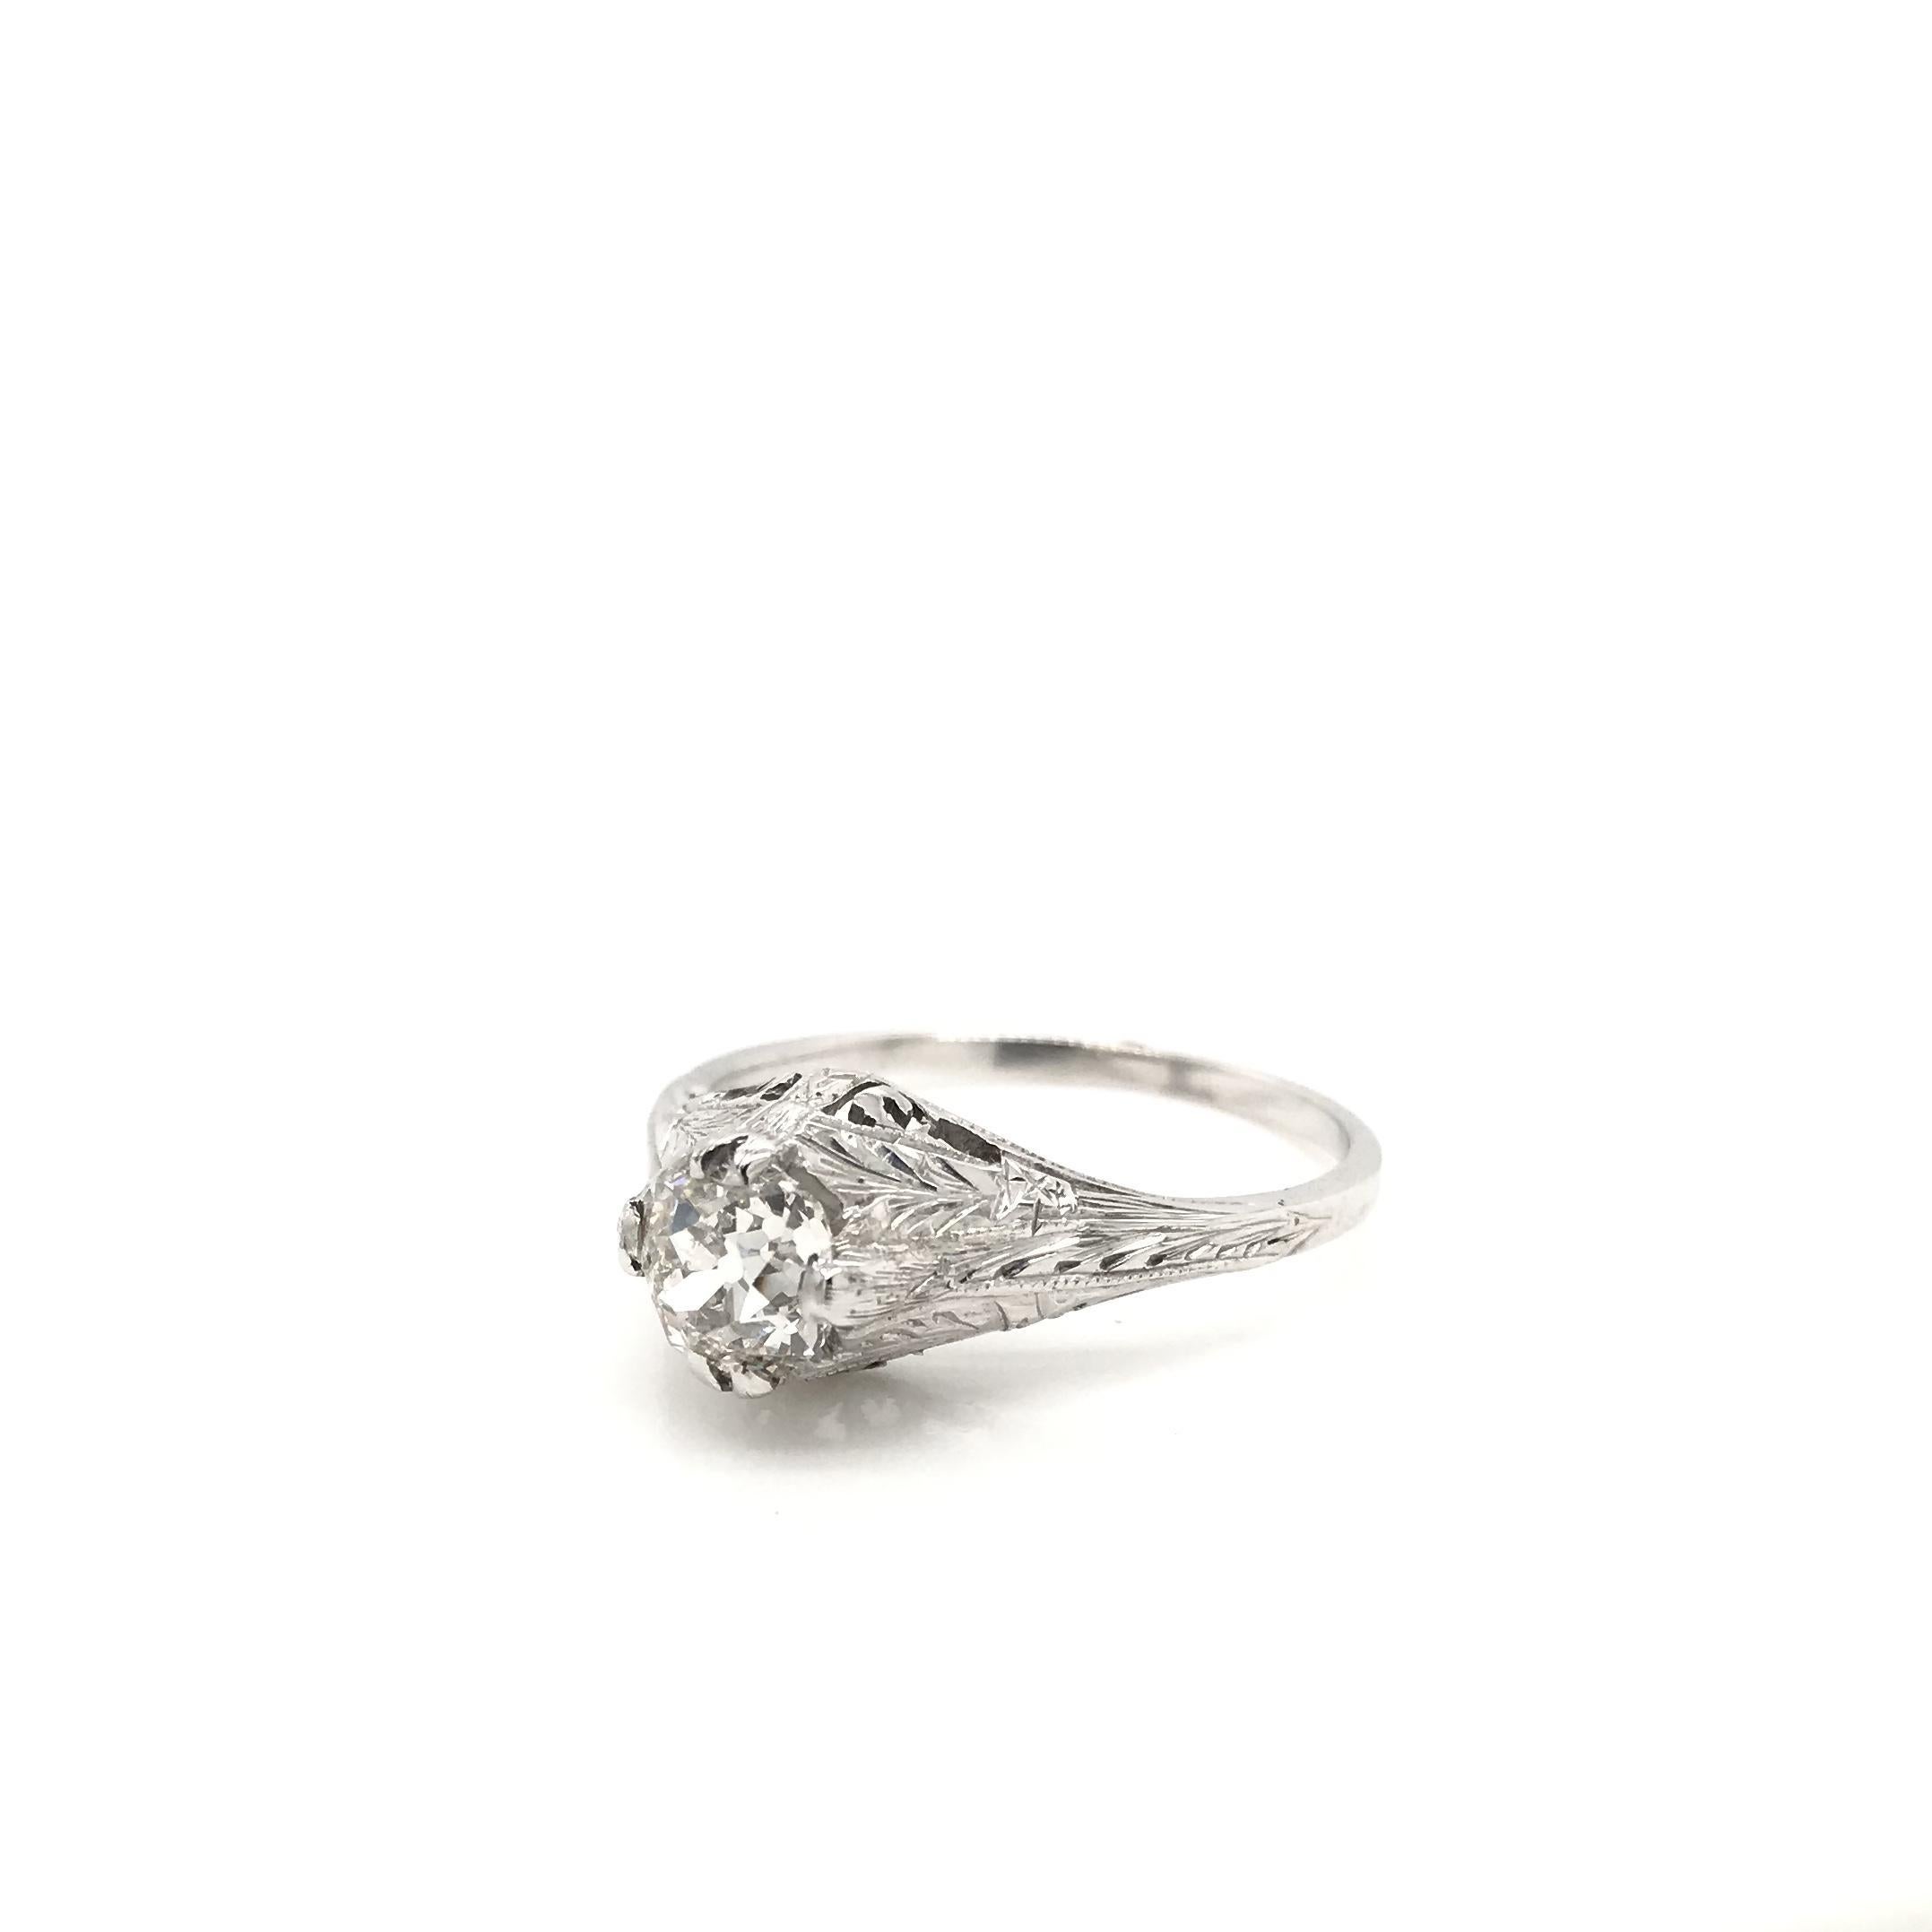 This antique diamond solitaire style ring was crafted sometime during the Art Deco design period (1920-1940). The setting is 20K white gold and features a center diamond measuring approximately 0.71 carats. The center diamond is an antique Old